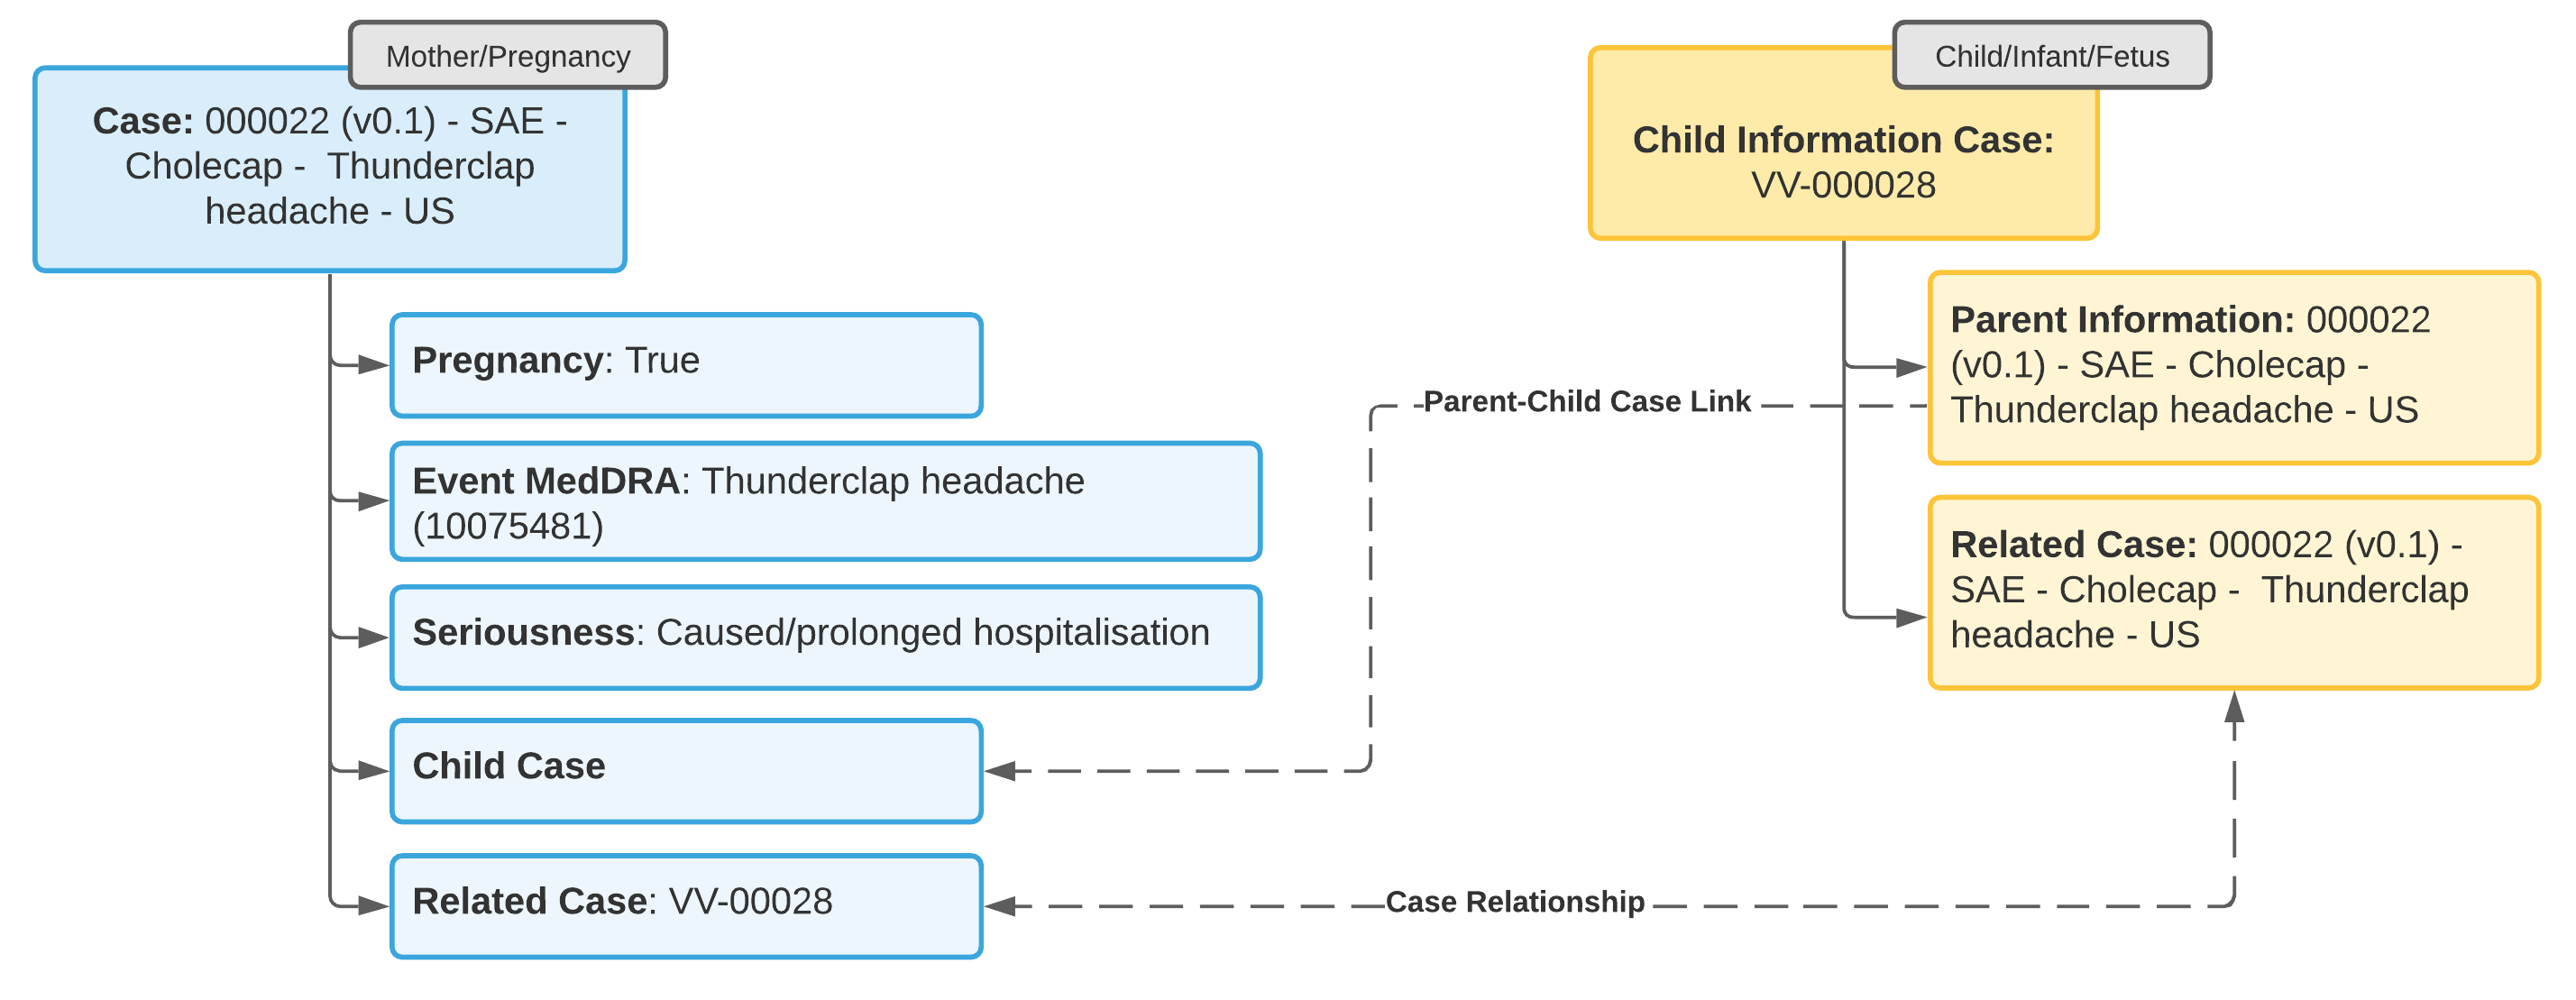 Example 2: Adverse Event in Mother, No Adverse Event in Child